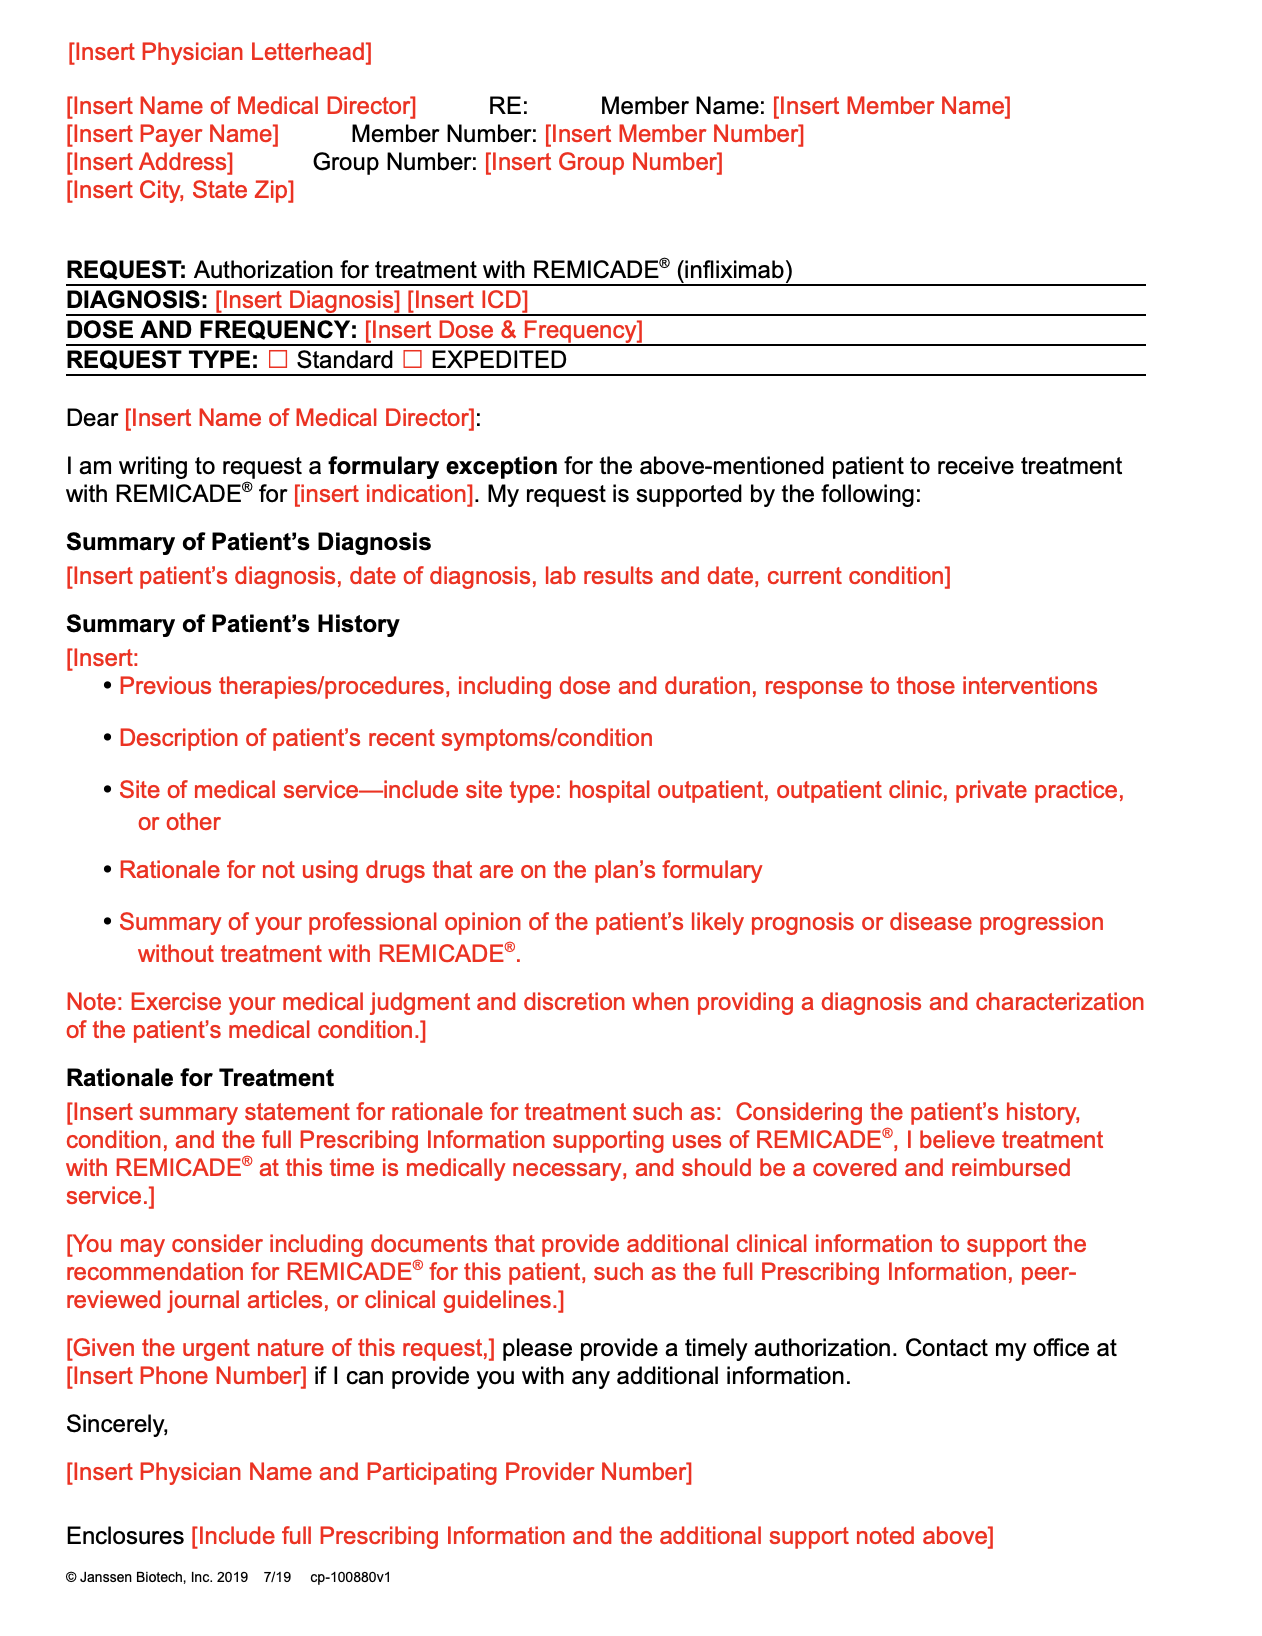 REMICADE® Letter of Exception